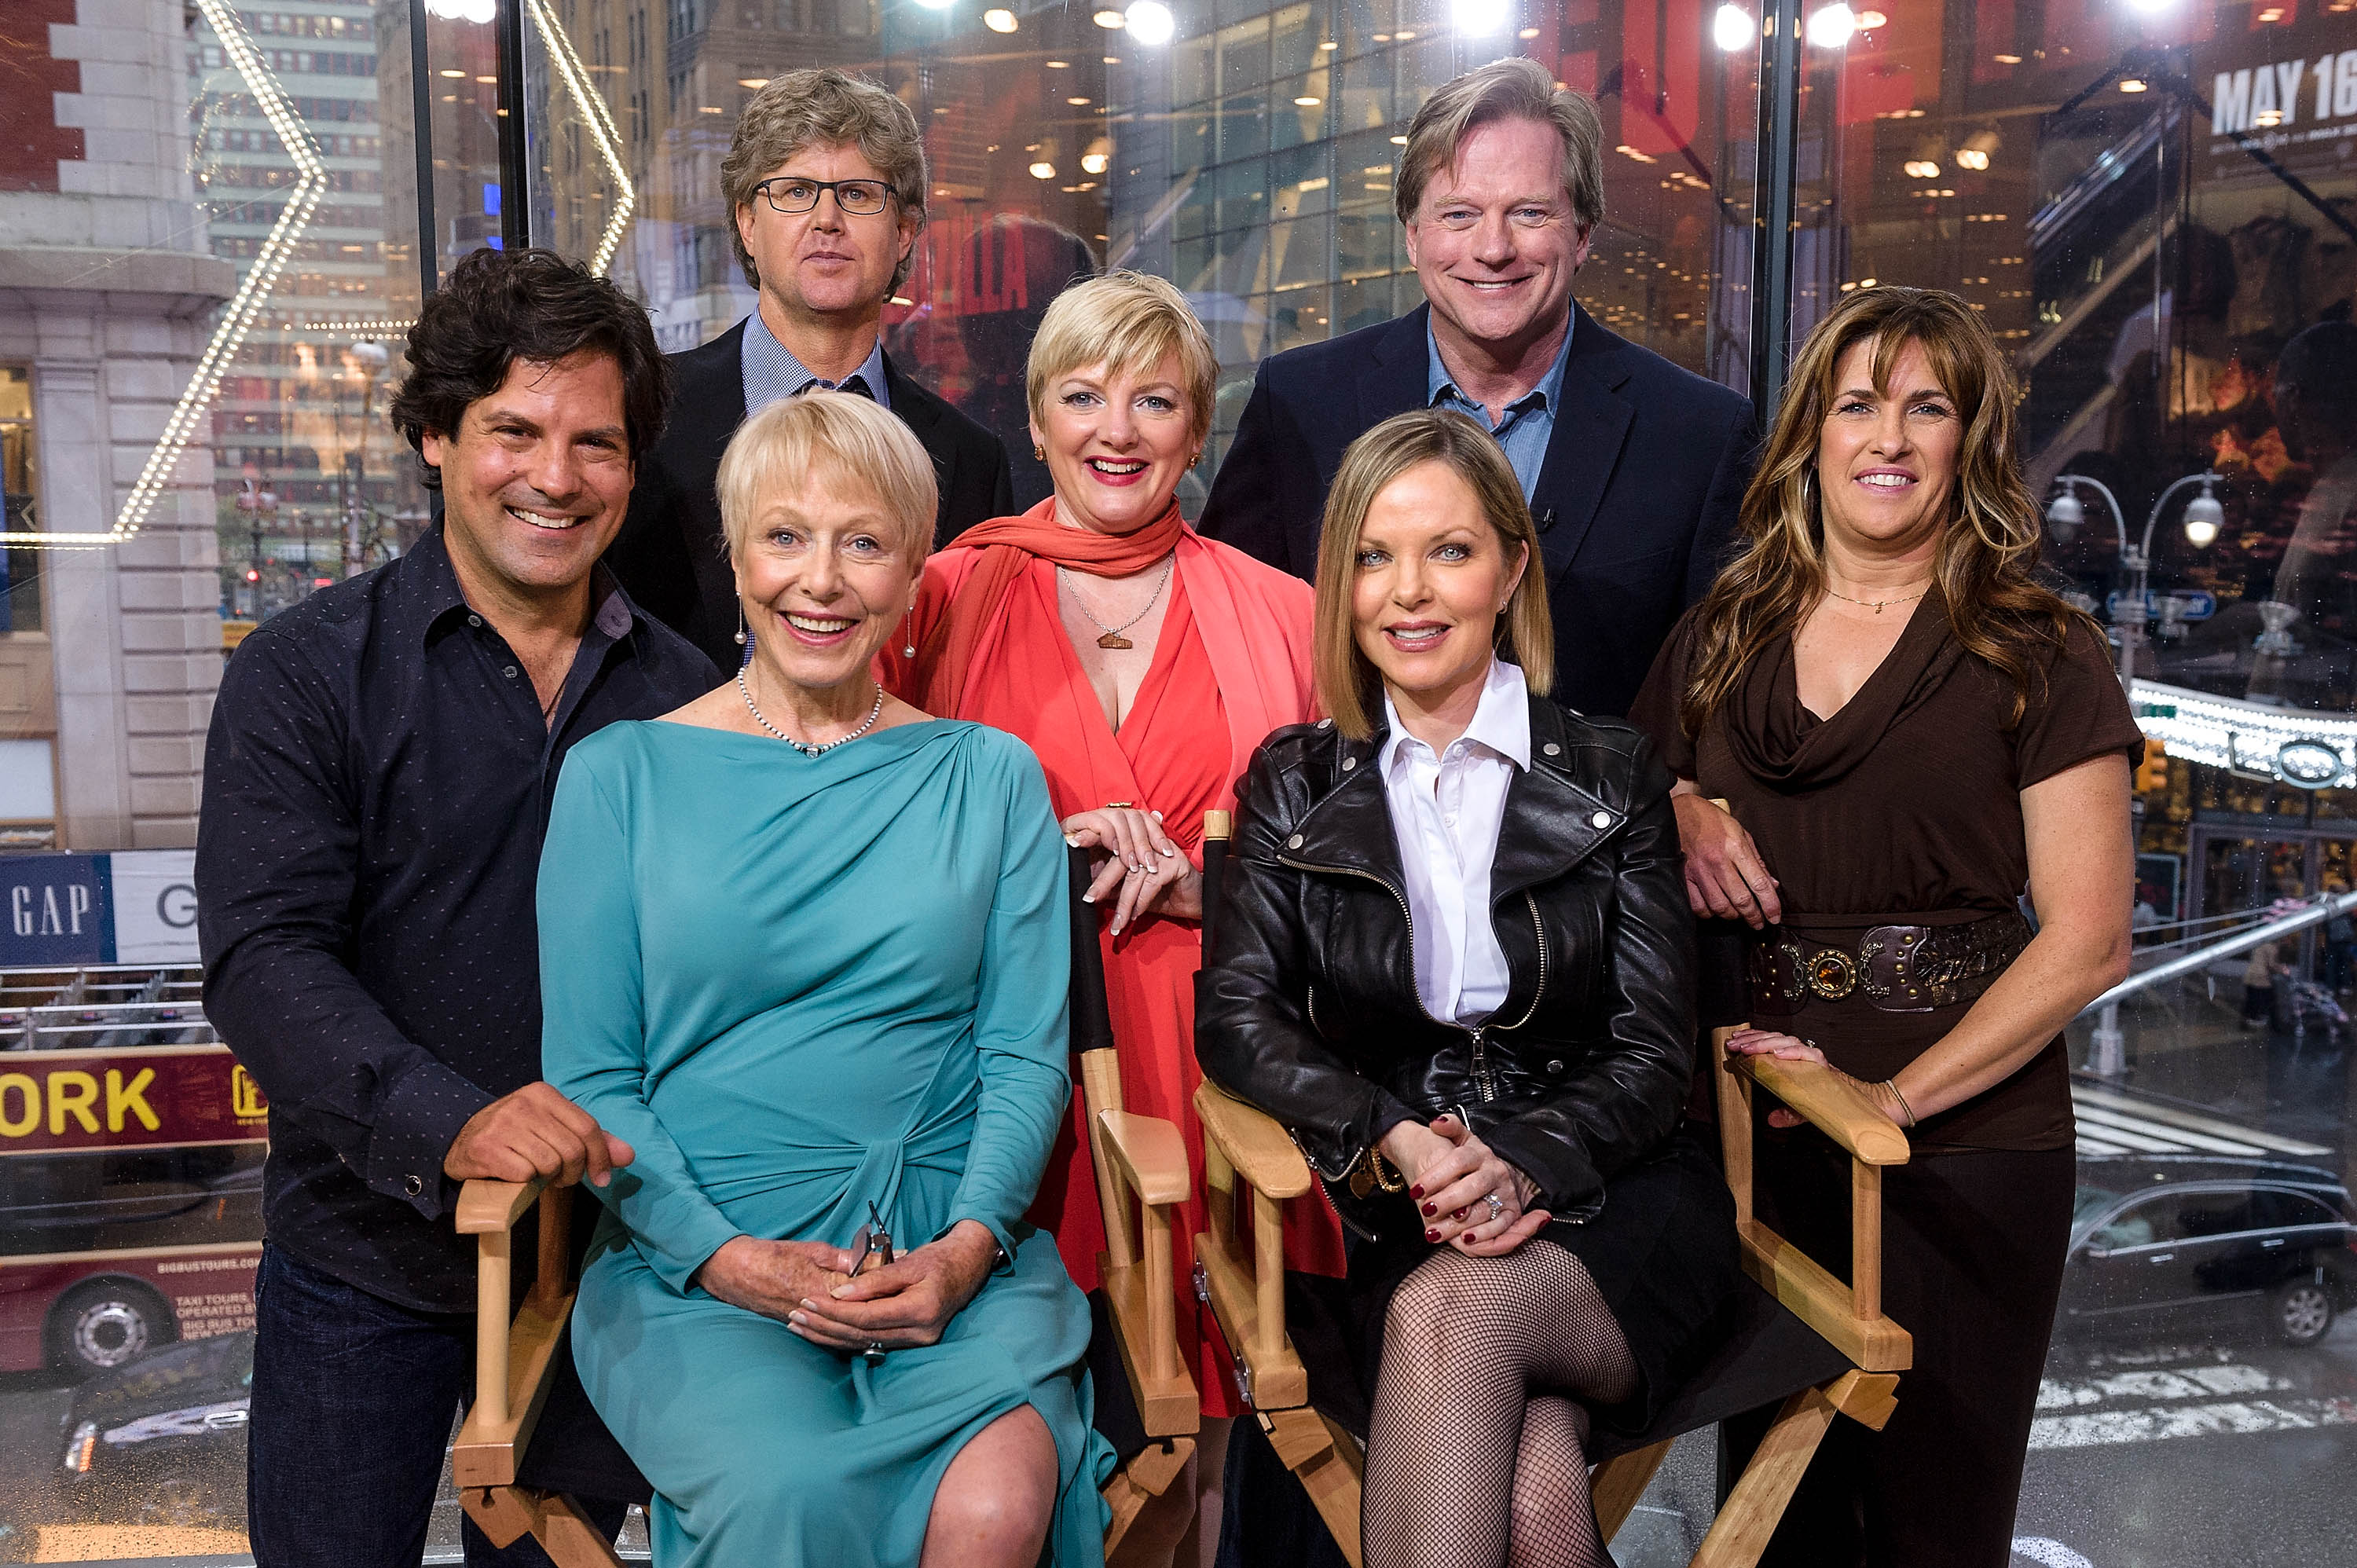 "Little House On The Prairie" Cast Members Visit "Extra" NEW YORK, NY - APRIL 30: (L-R standing) Matthew Labyorteaux, Michael Landon, Jr., Alison Arngrim, Dean Butler, Lindsay Greenbush, (L-R seated) Karen Grassle, and Melissa Sue Anderson of 'Little House On The Prairie' visit "Extra" at their New York studios at H&M in Times Square on April 30, 2014 in New York City. 